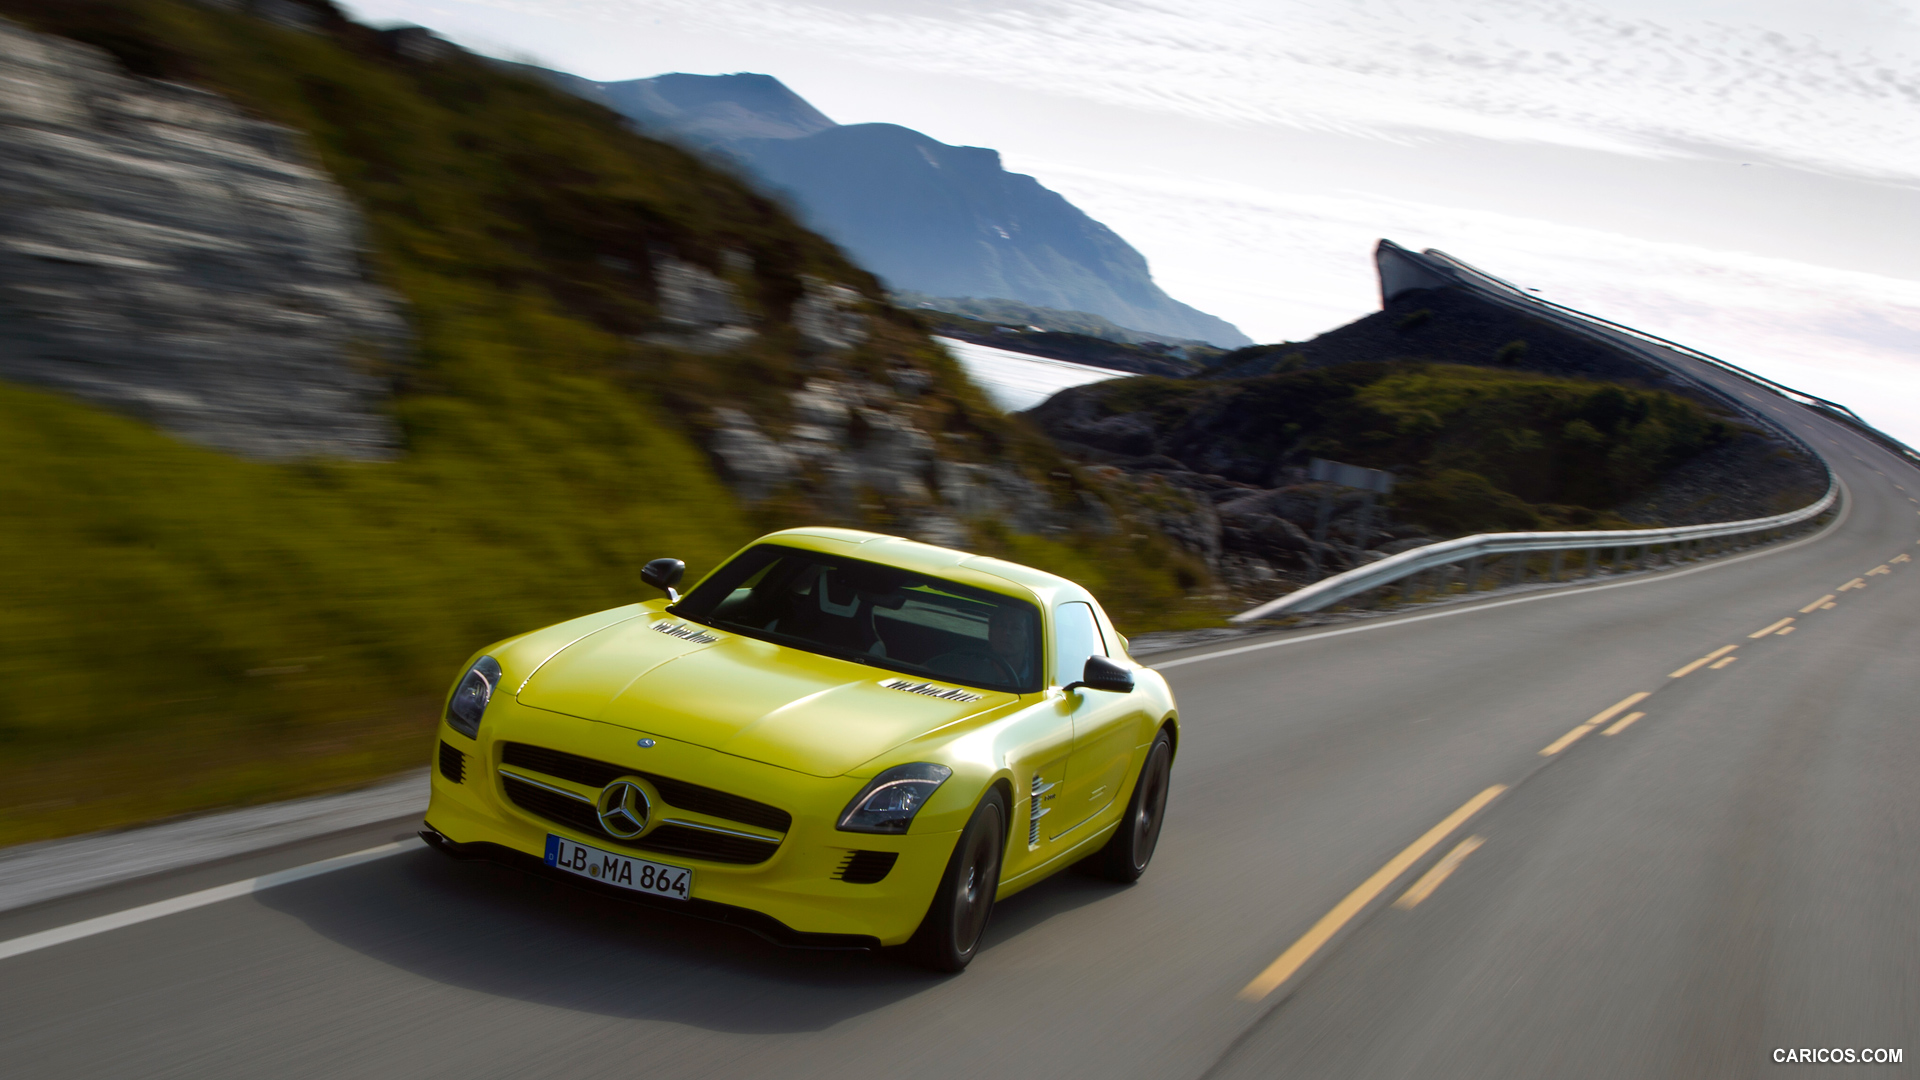 Mercedes-Benz SLS AMG E-CELL Concept  - Front, #34 of 60